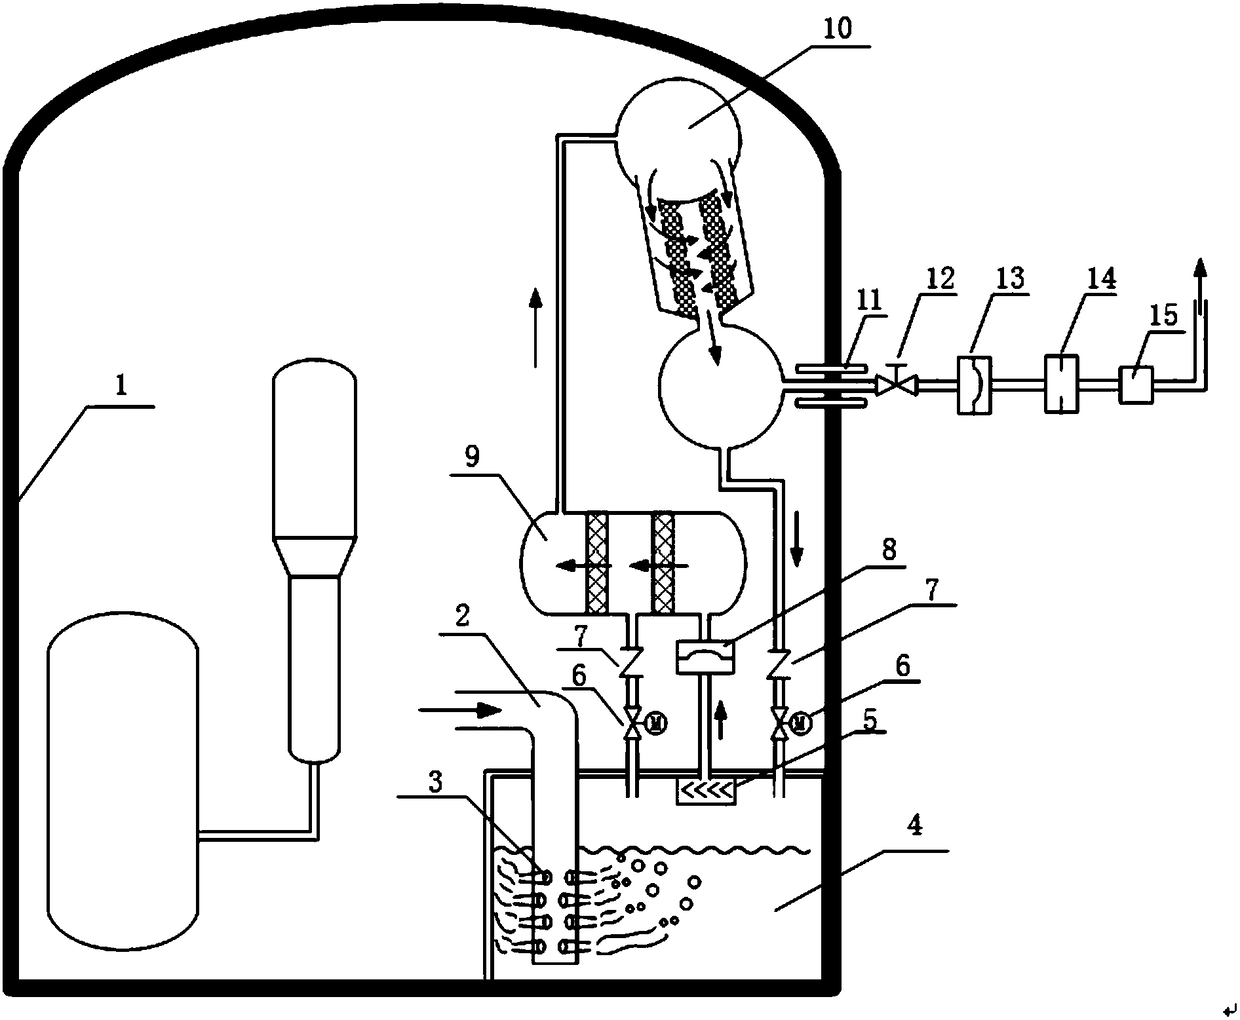 Built-in containment vessel filtering discharging system